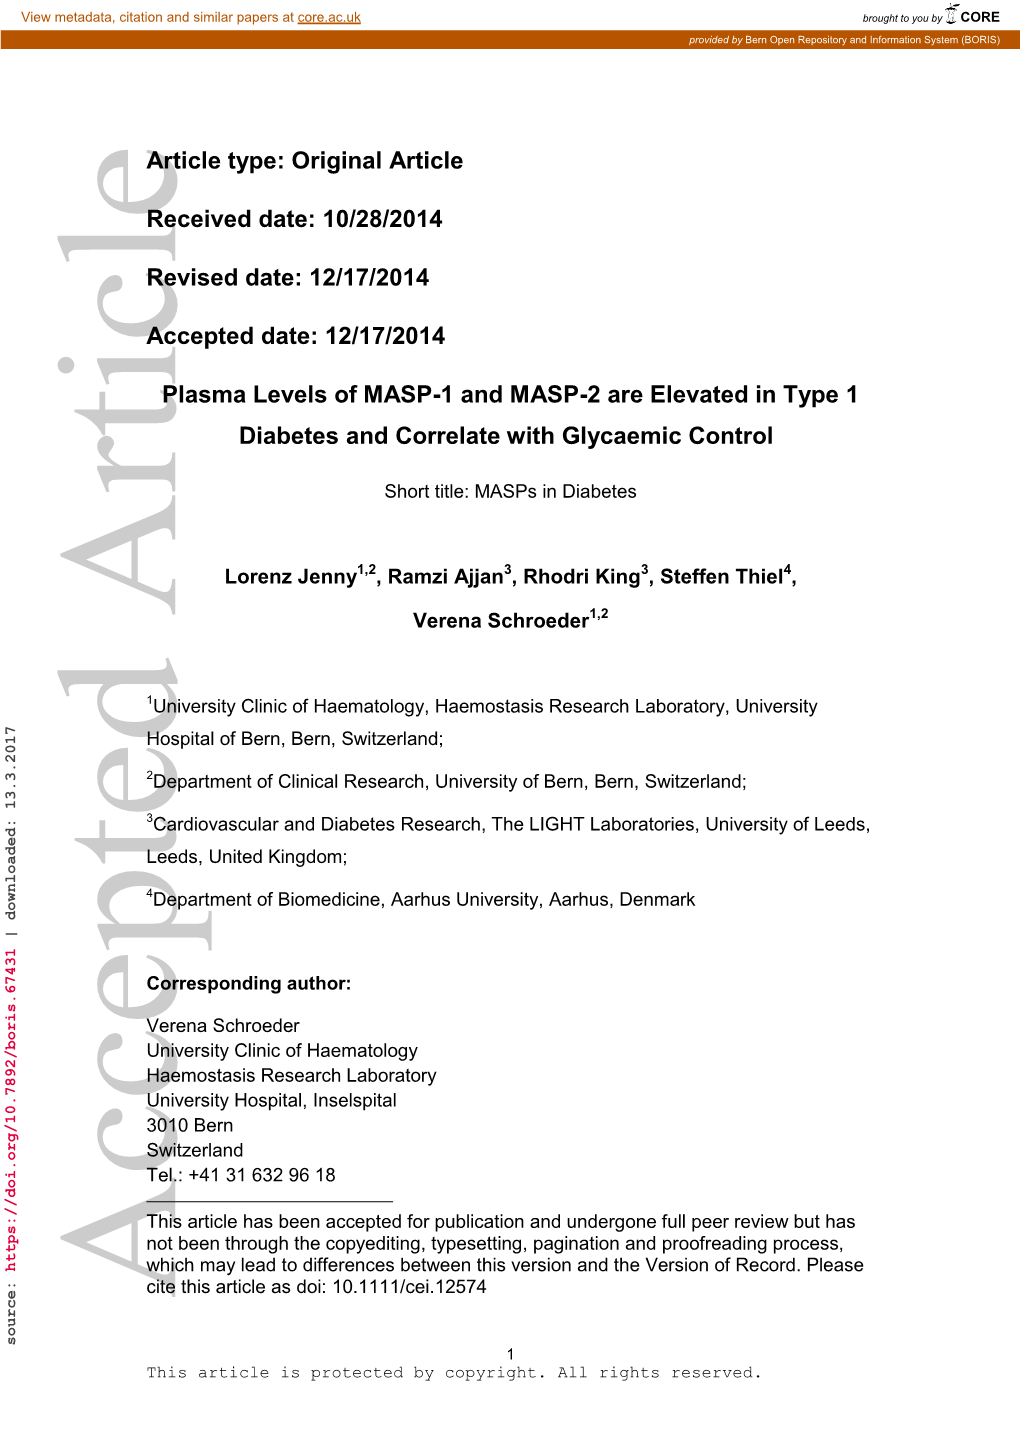 Plasma Levels of MASP1 and MASP2 Are Elevated in Type 1